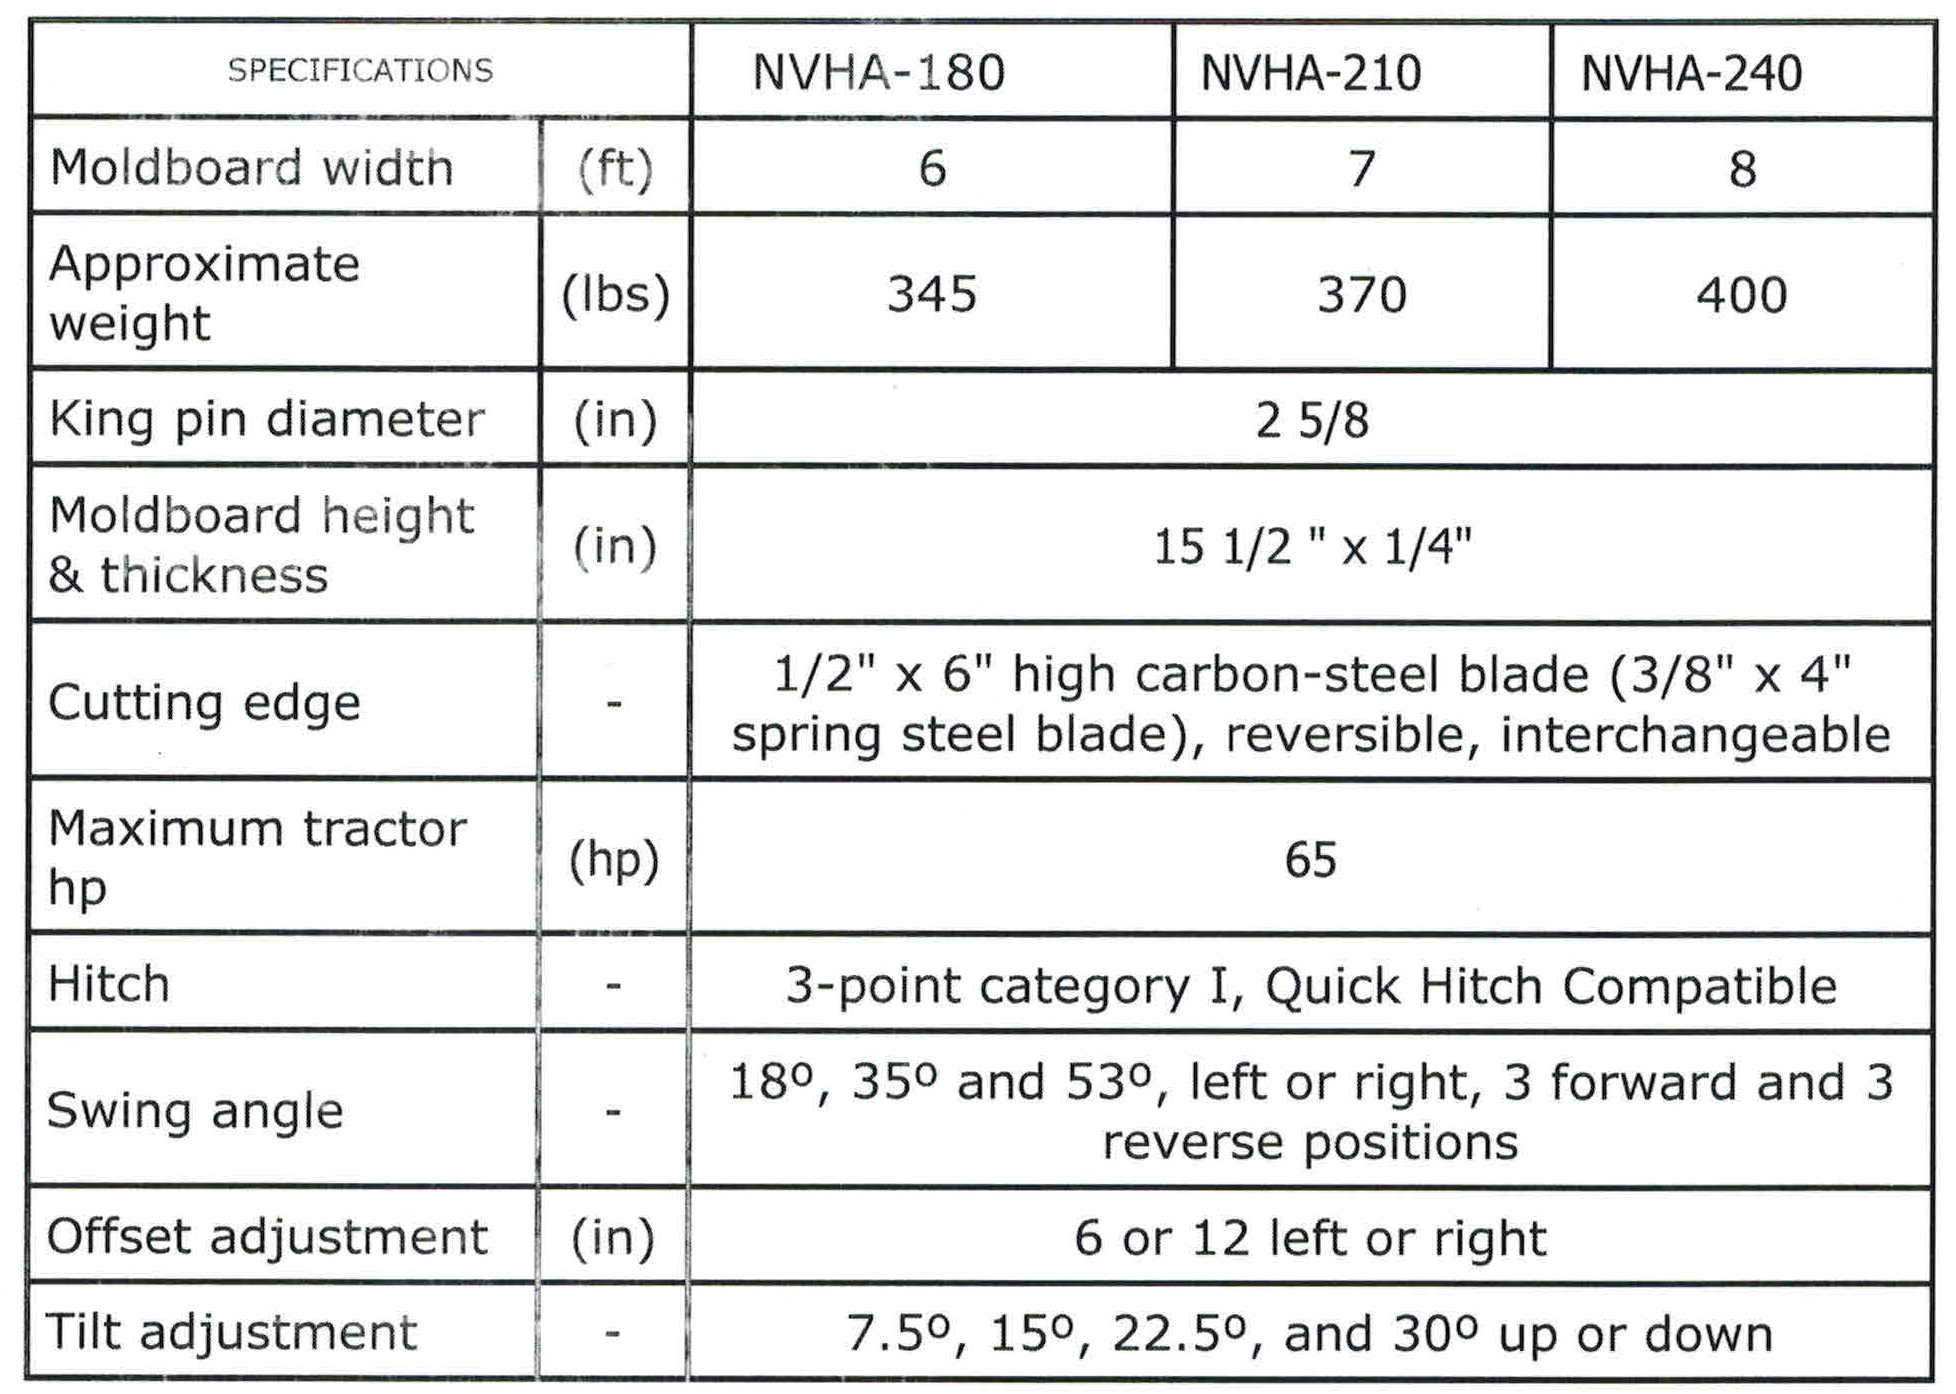 Specifications For NVHA Series Tractor Blades